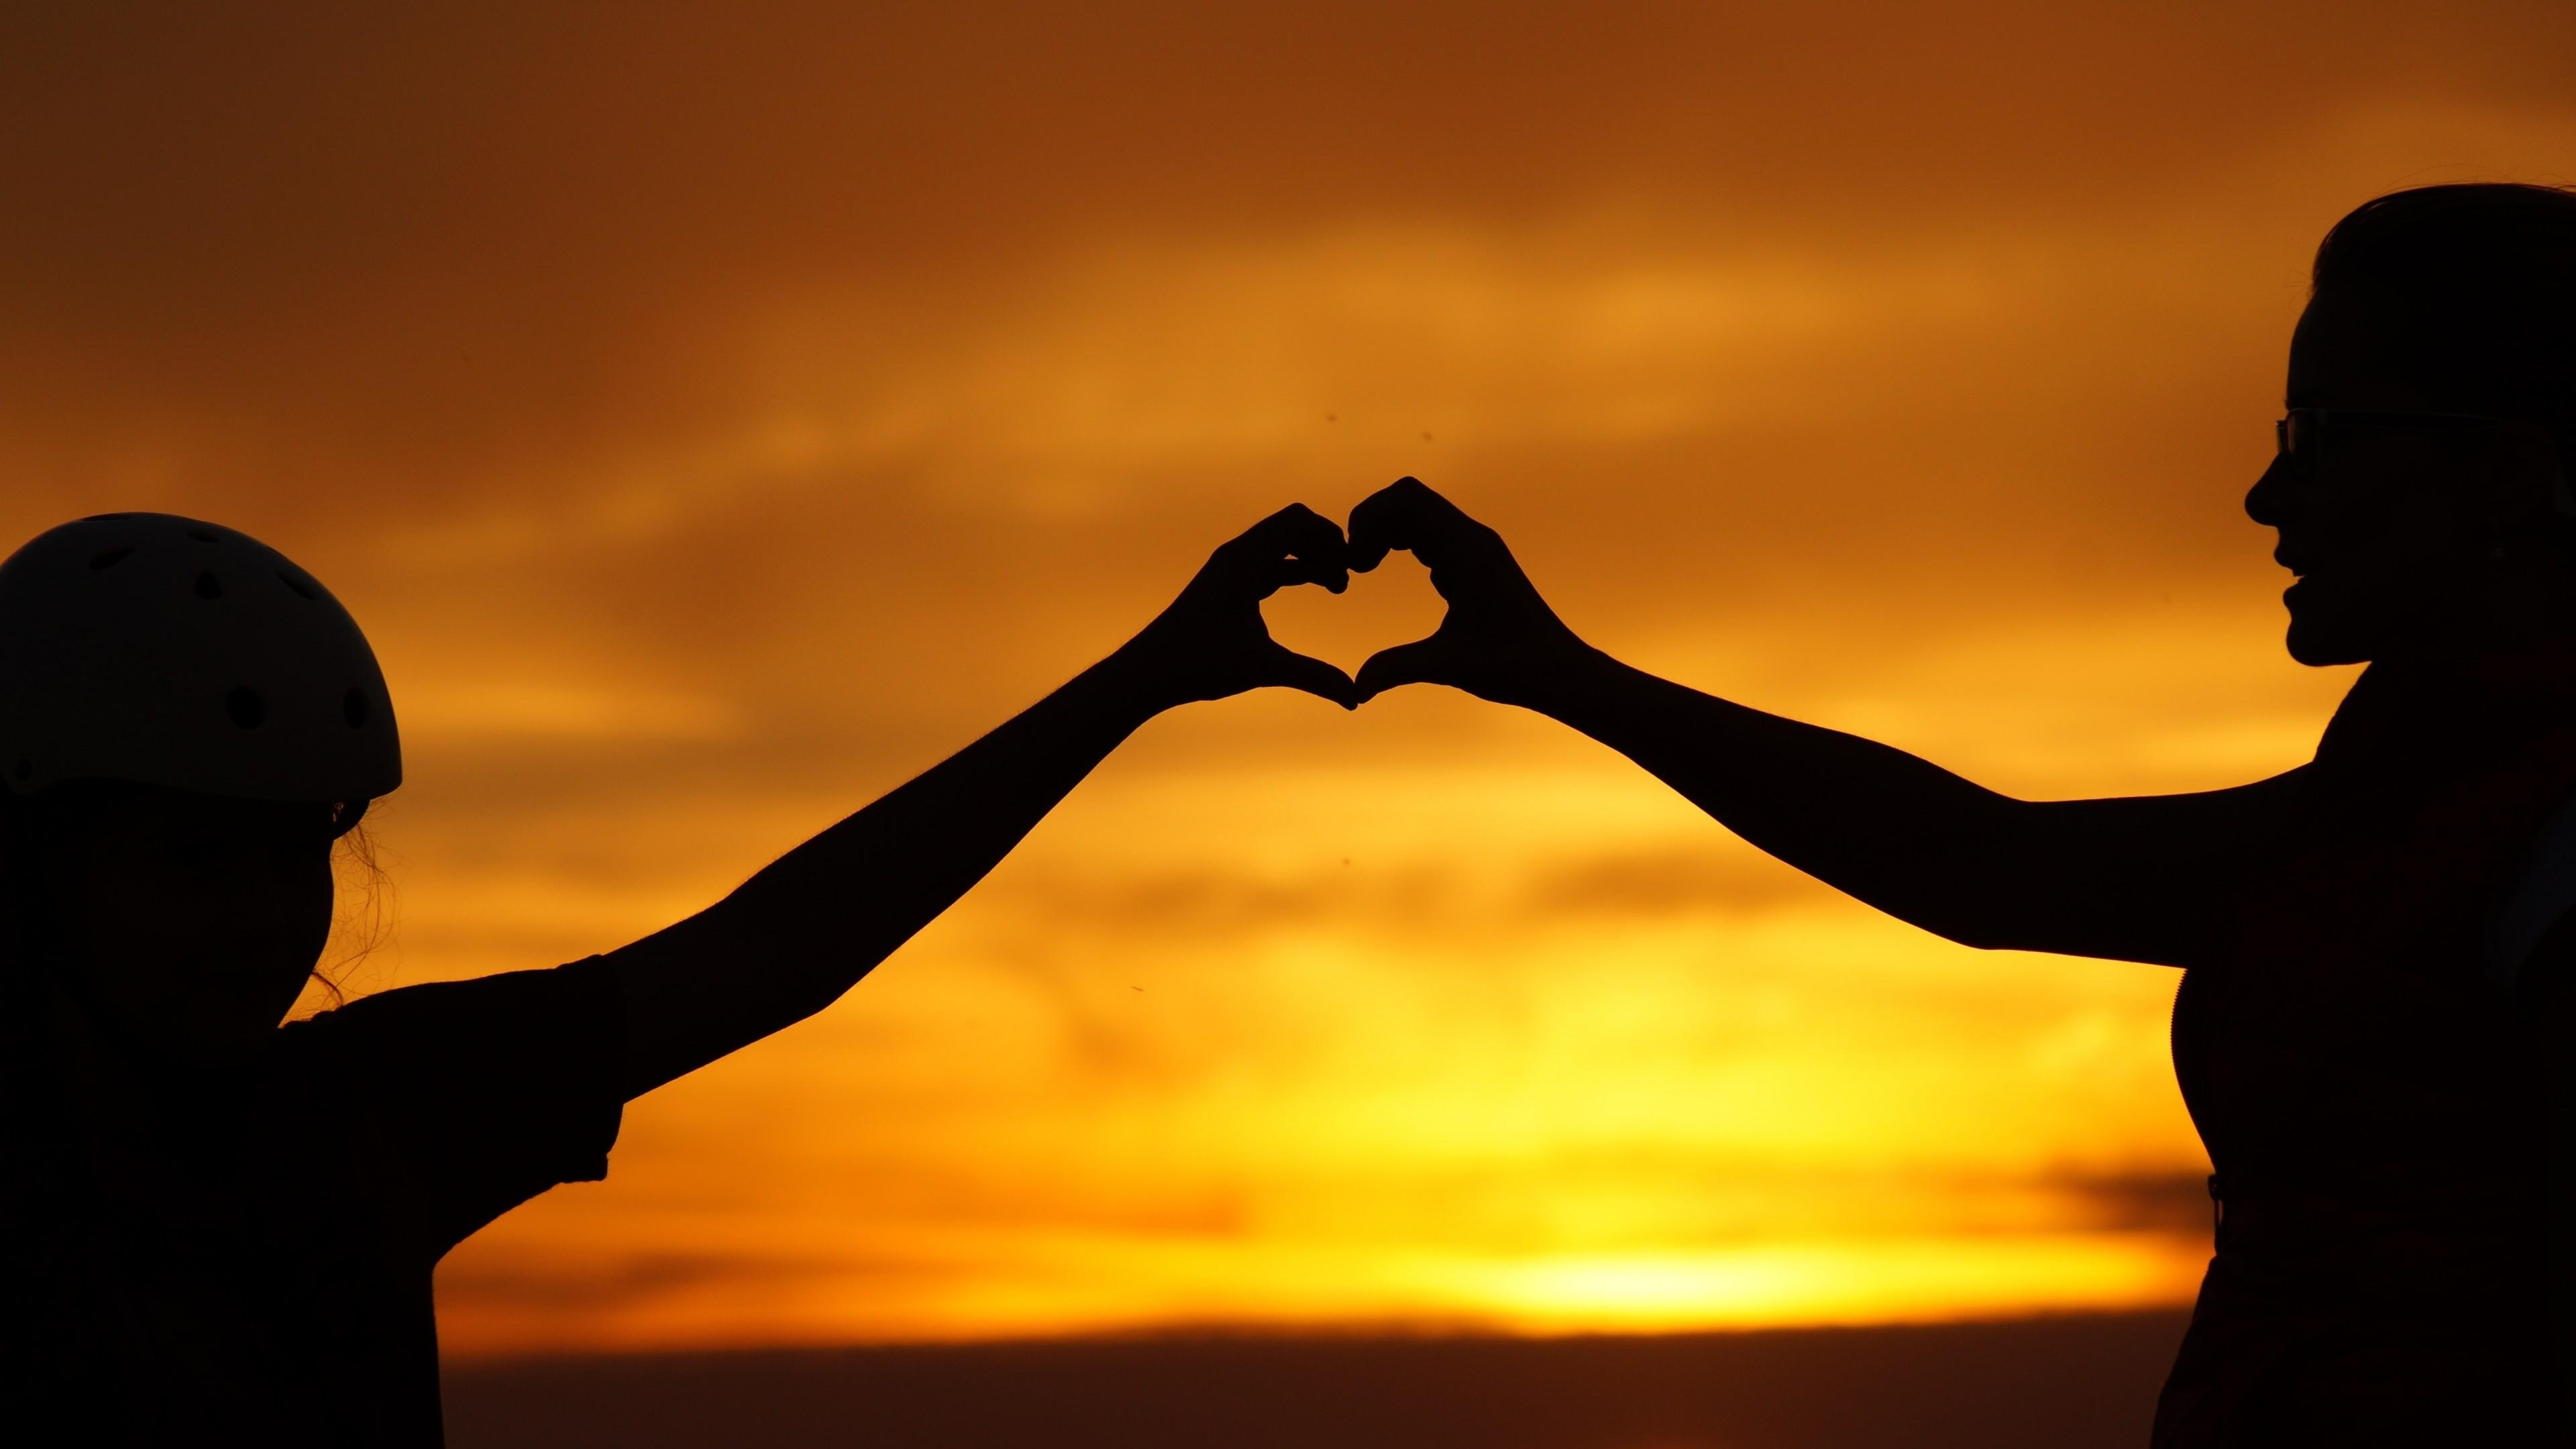 Download 3840x2160 Heart Gesture, Sunset, Scenery, Silhouette